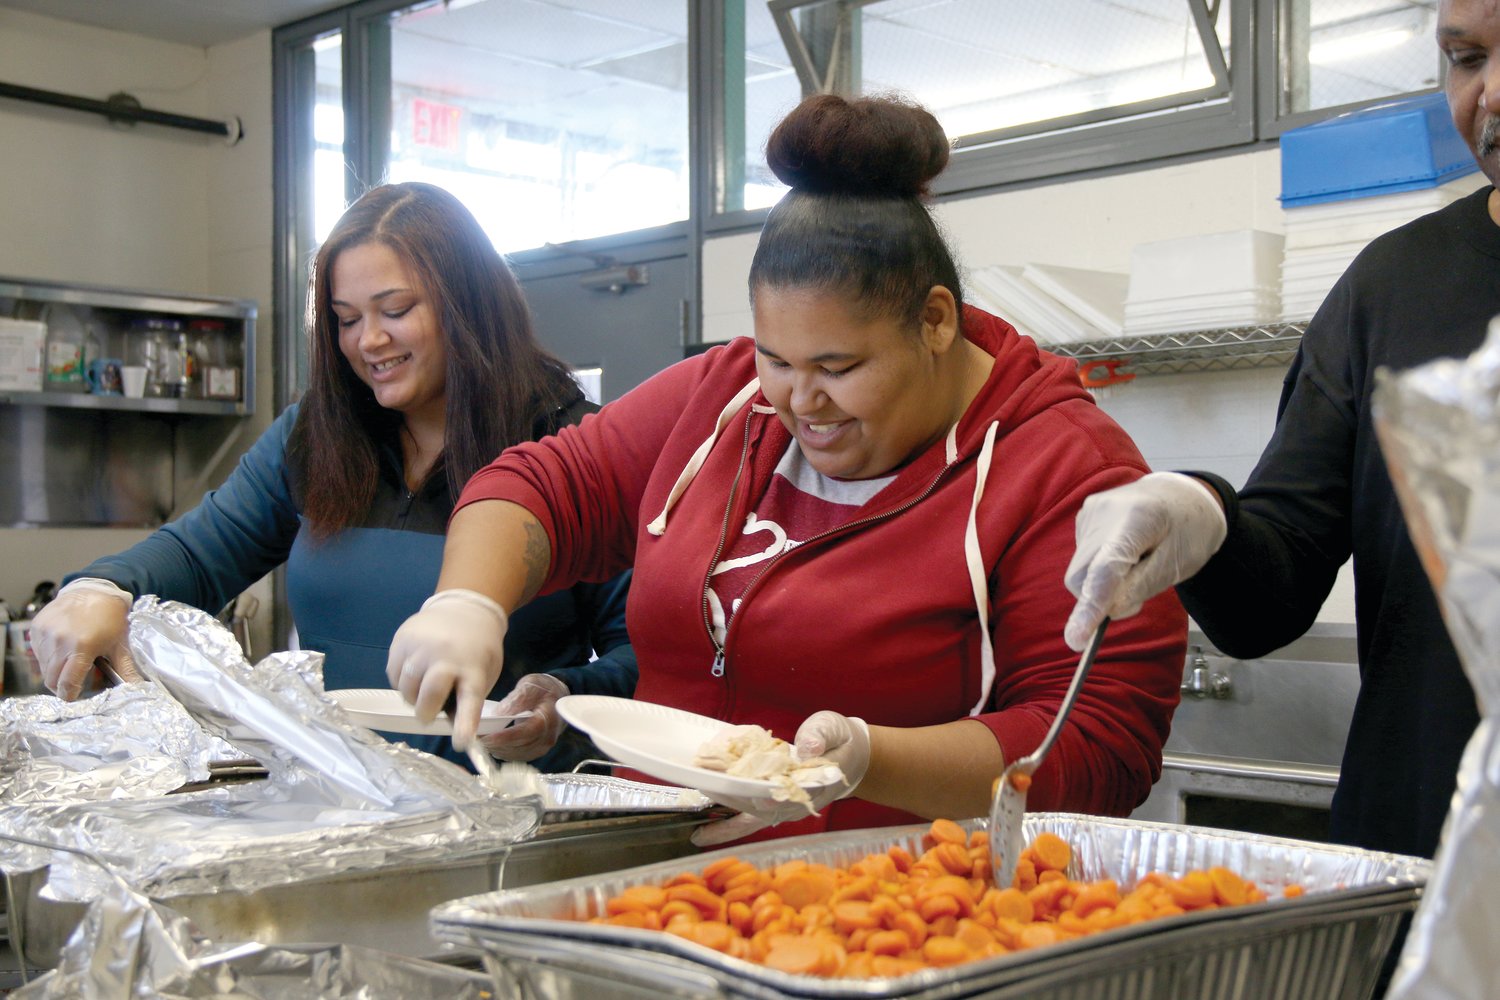 Volunteers serve Thanksgiving meals at Emmanuel House. Responding to the urgent need for additional emergency homeless shelters in December of 2010, Bishop Thomas J. Tobin opened Emmanuel House to provide a warm place to sleep for those without a home.